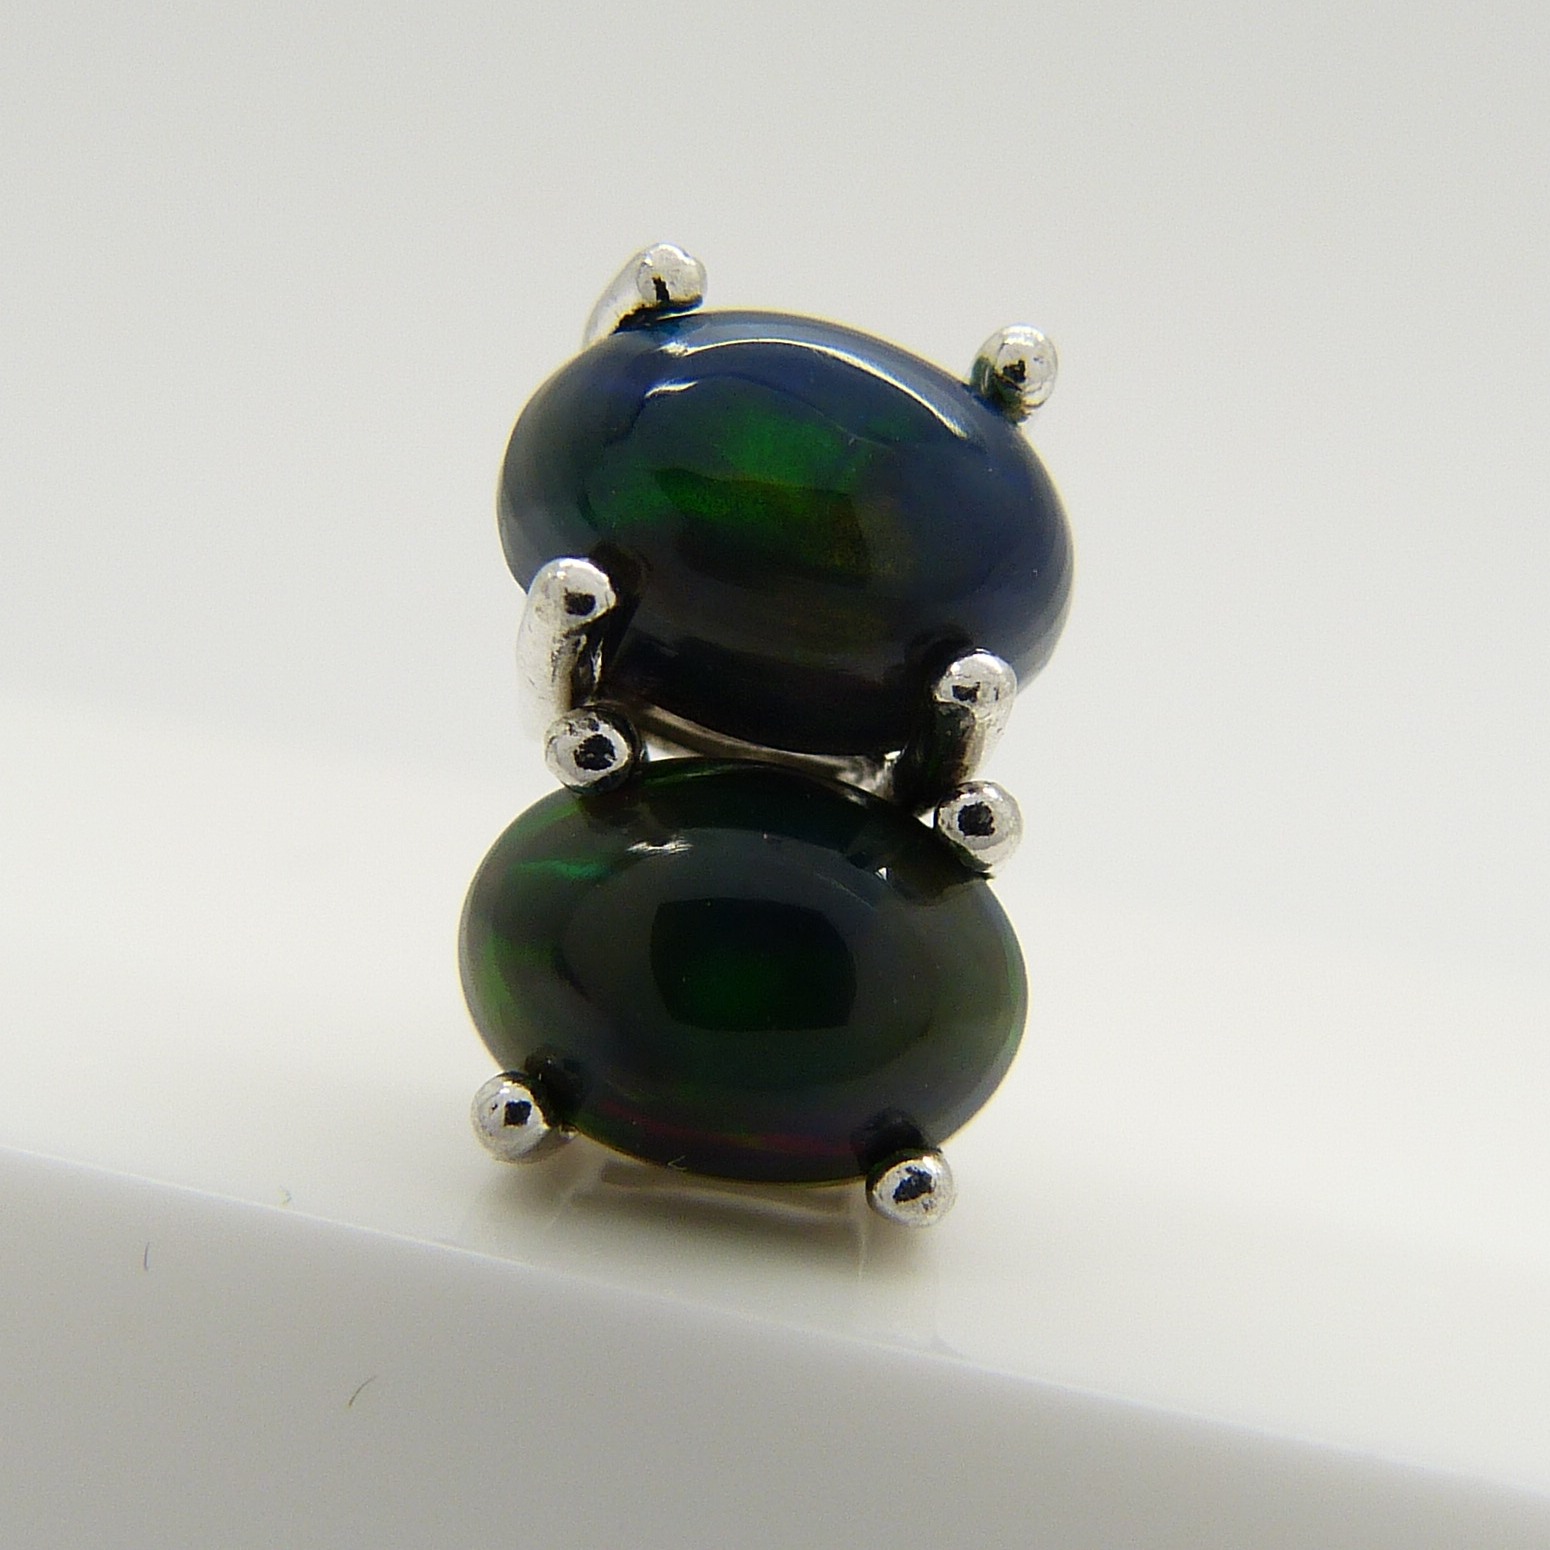 A pair of silver ear studs set with cabochon black Ethiopian opals, 1.10 carats (approx) - Image 3 of 5